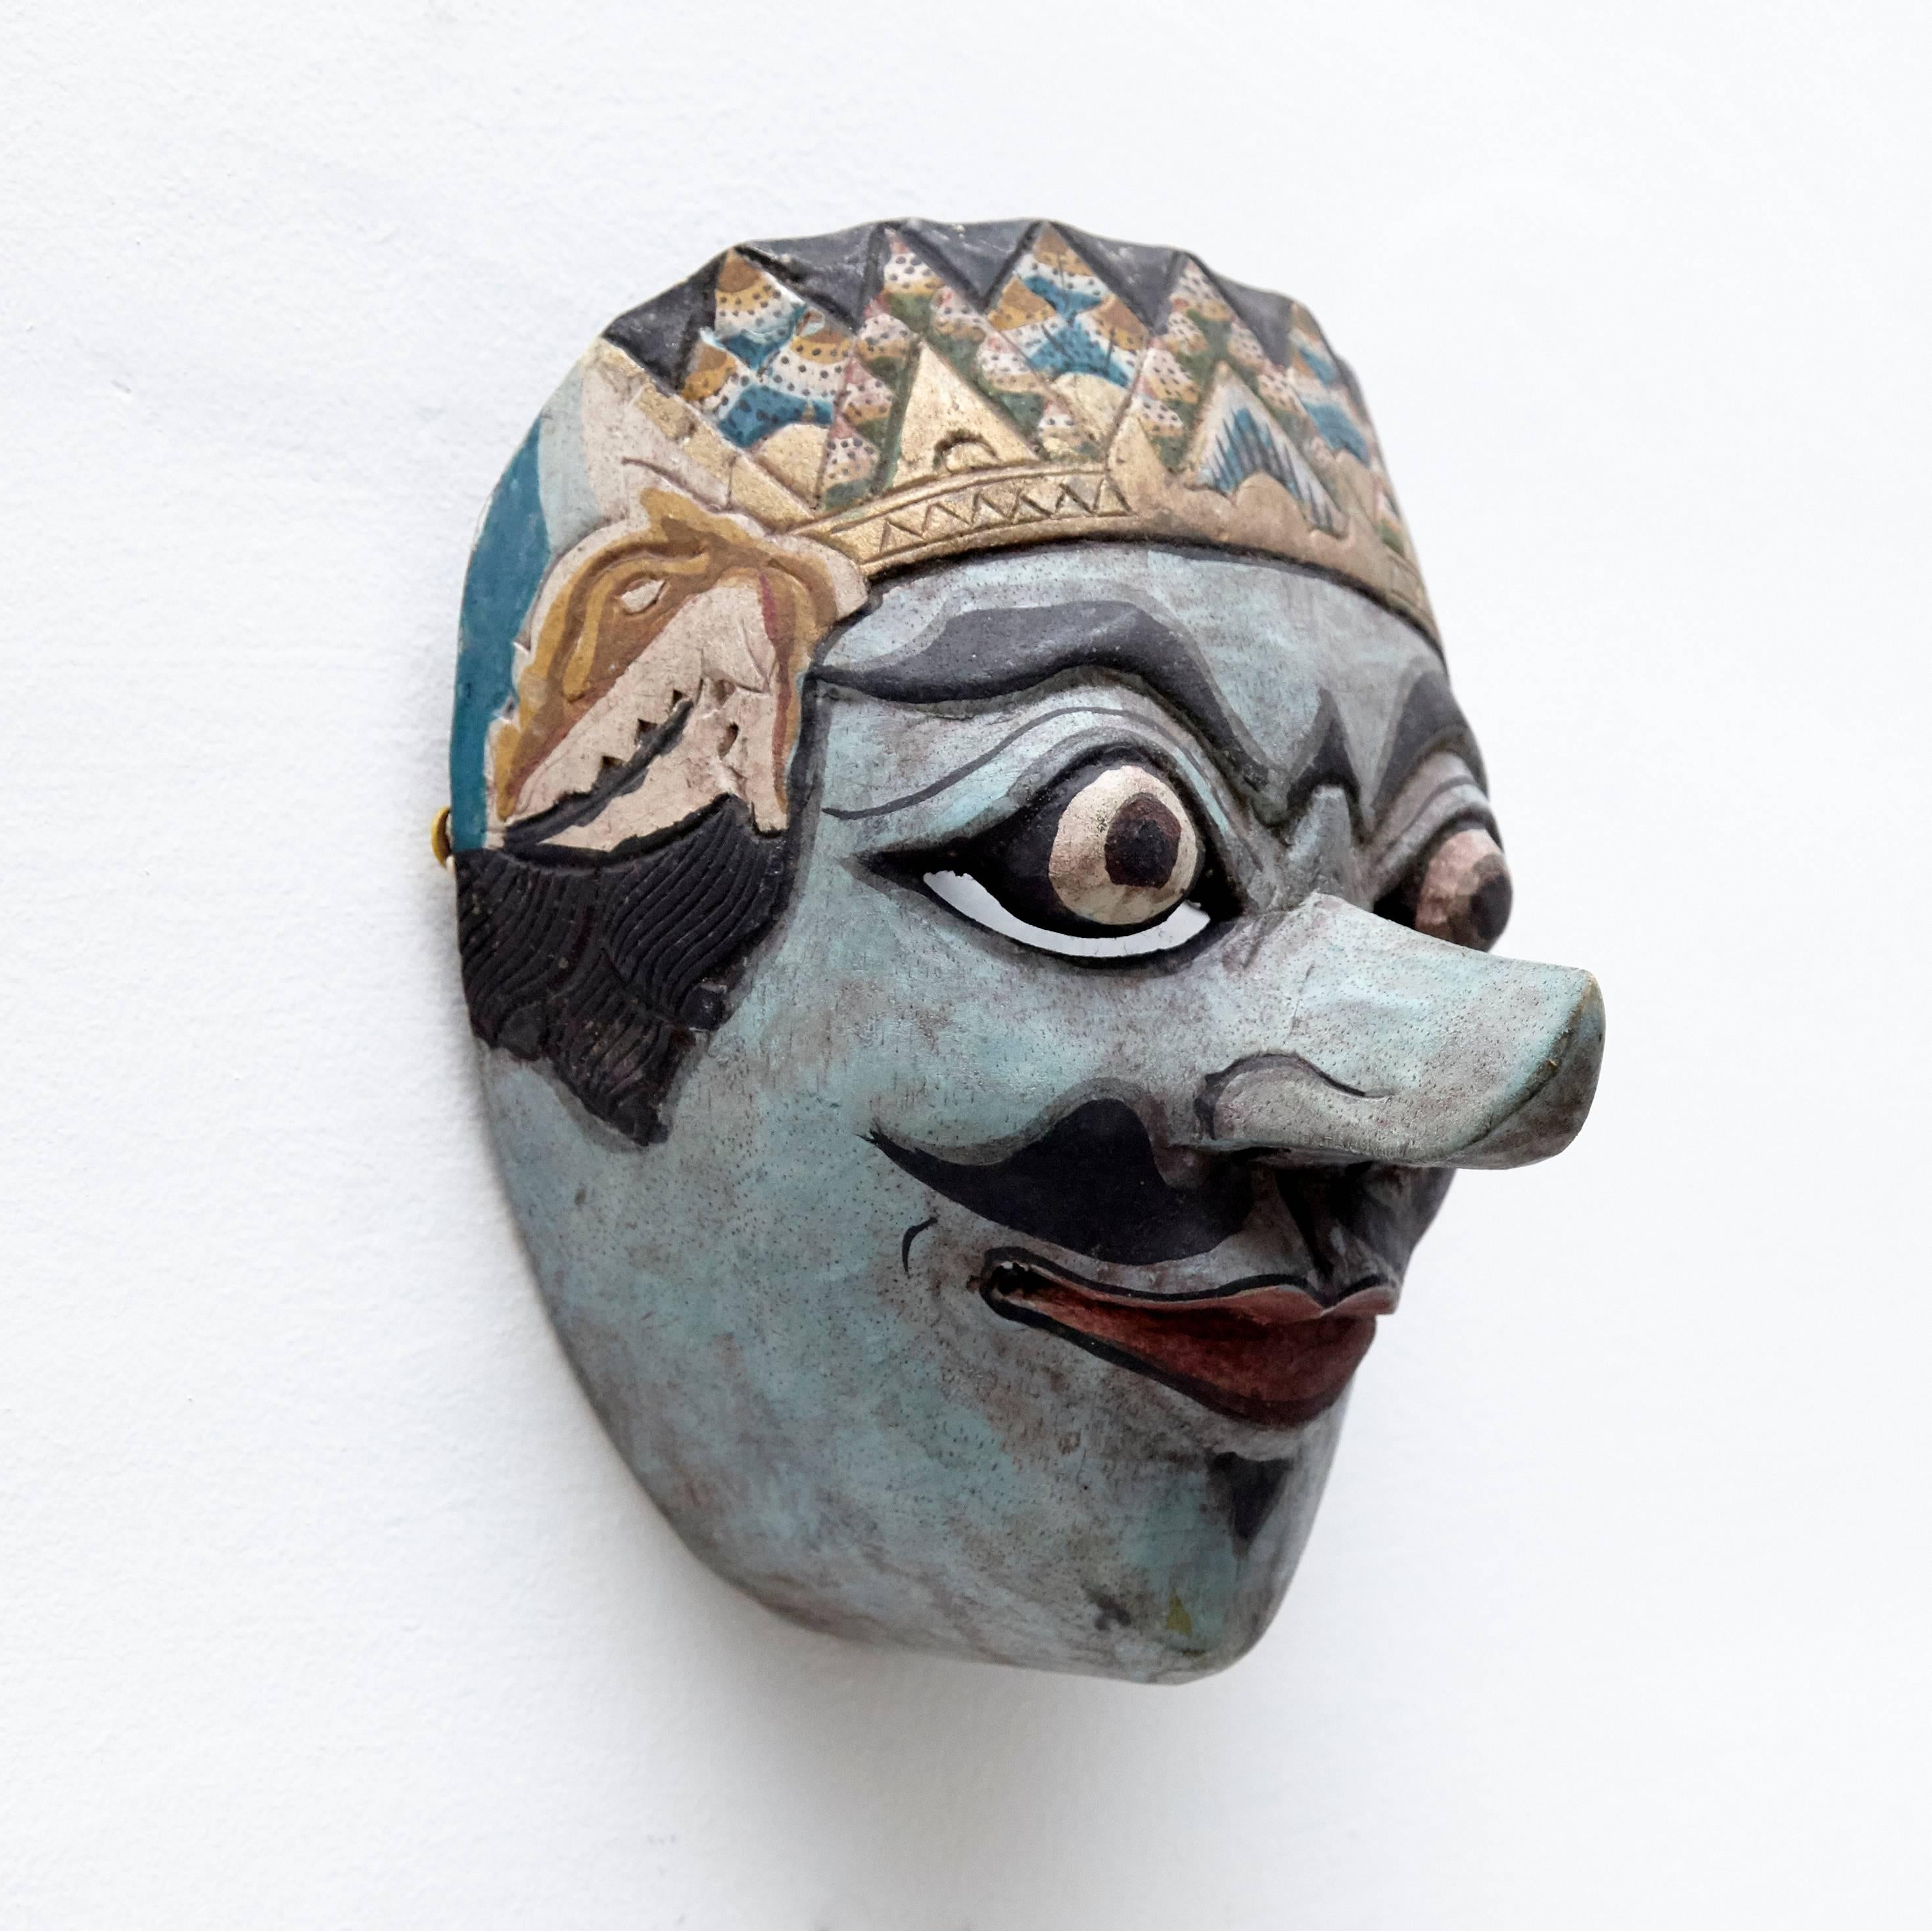 Primitive Southeast East of Asia Mask from the 20th Century